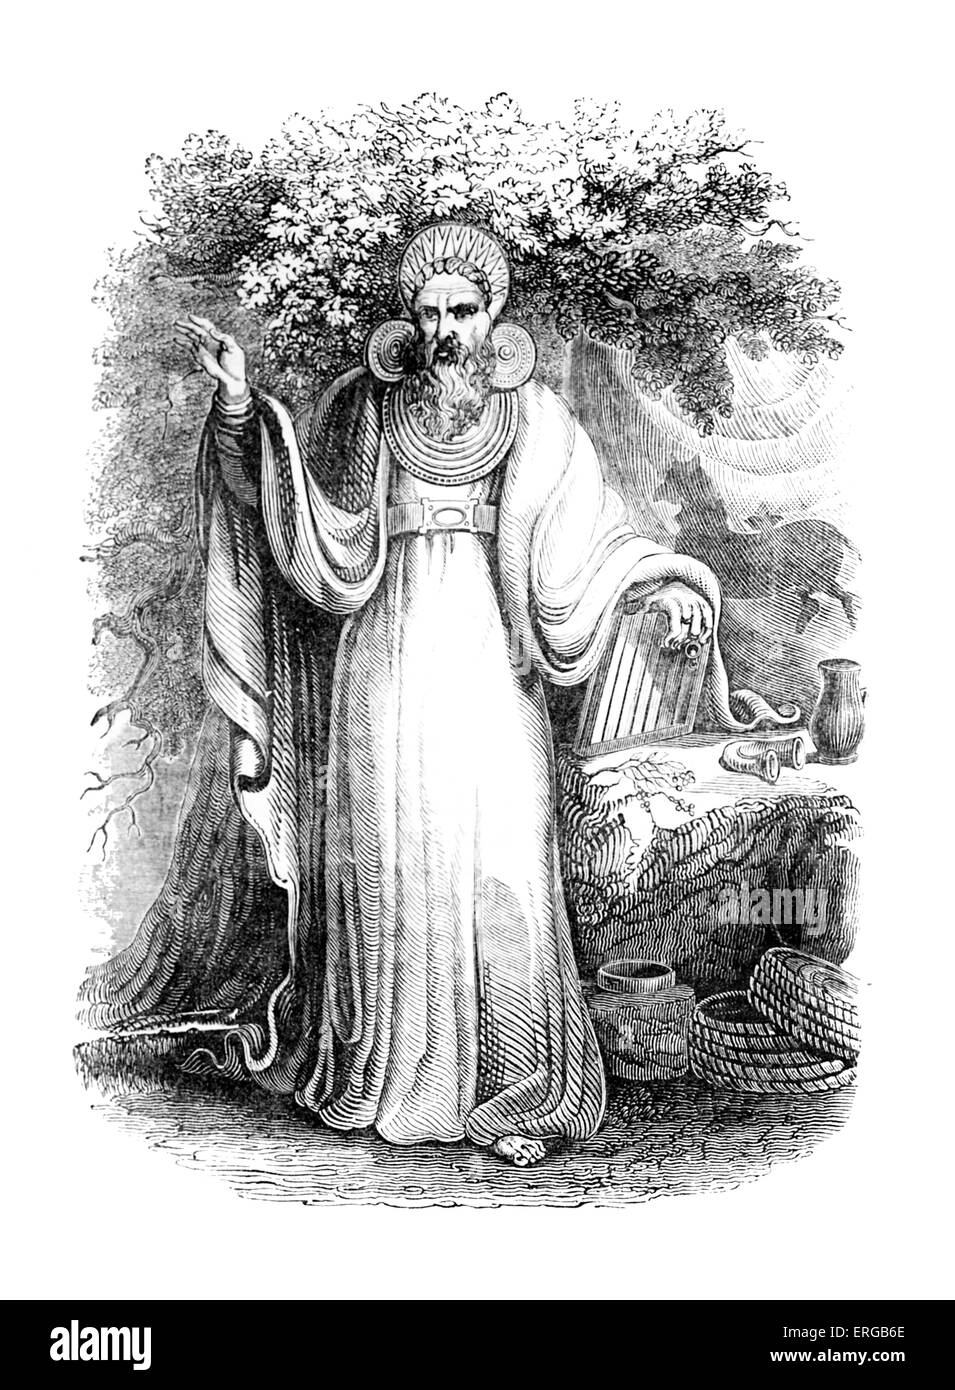 Arch-druid in his full Judicial costume. A druid was a member of the priestly class in Britain, Ireland, and Gaul,  during the Stock Photo